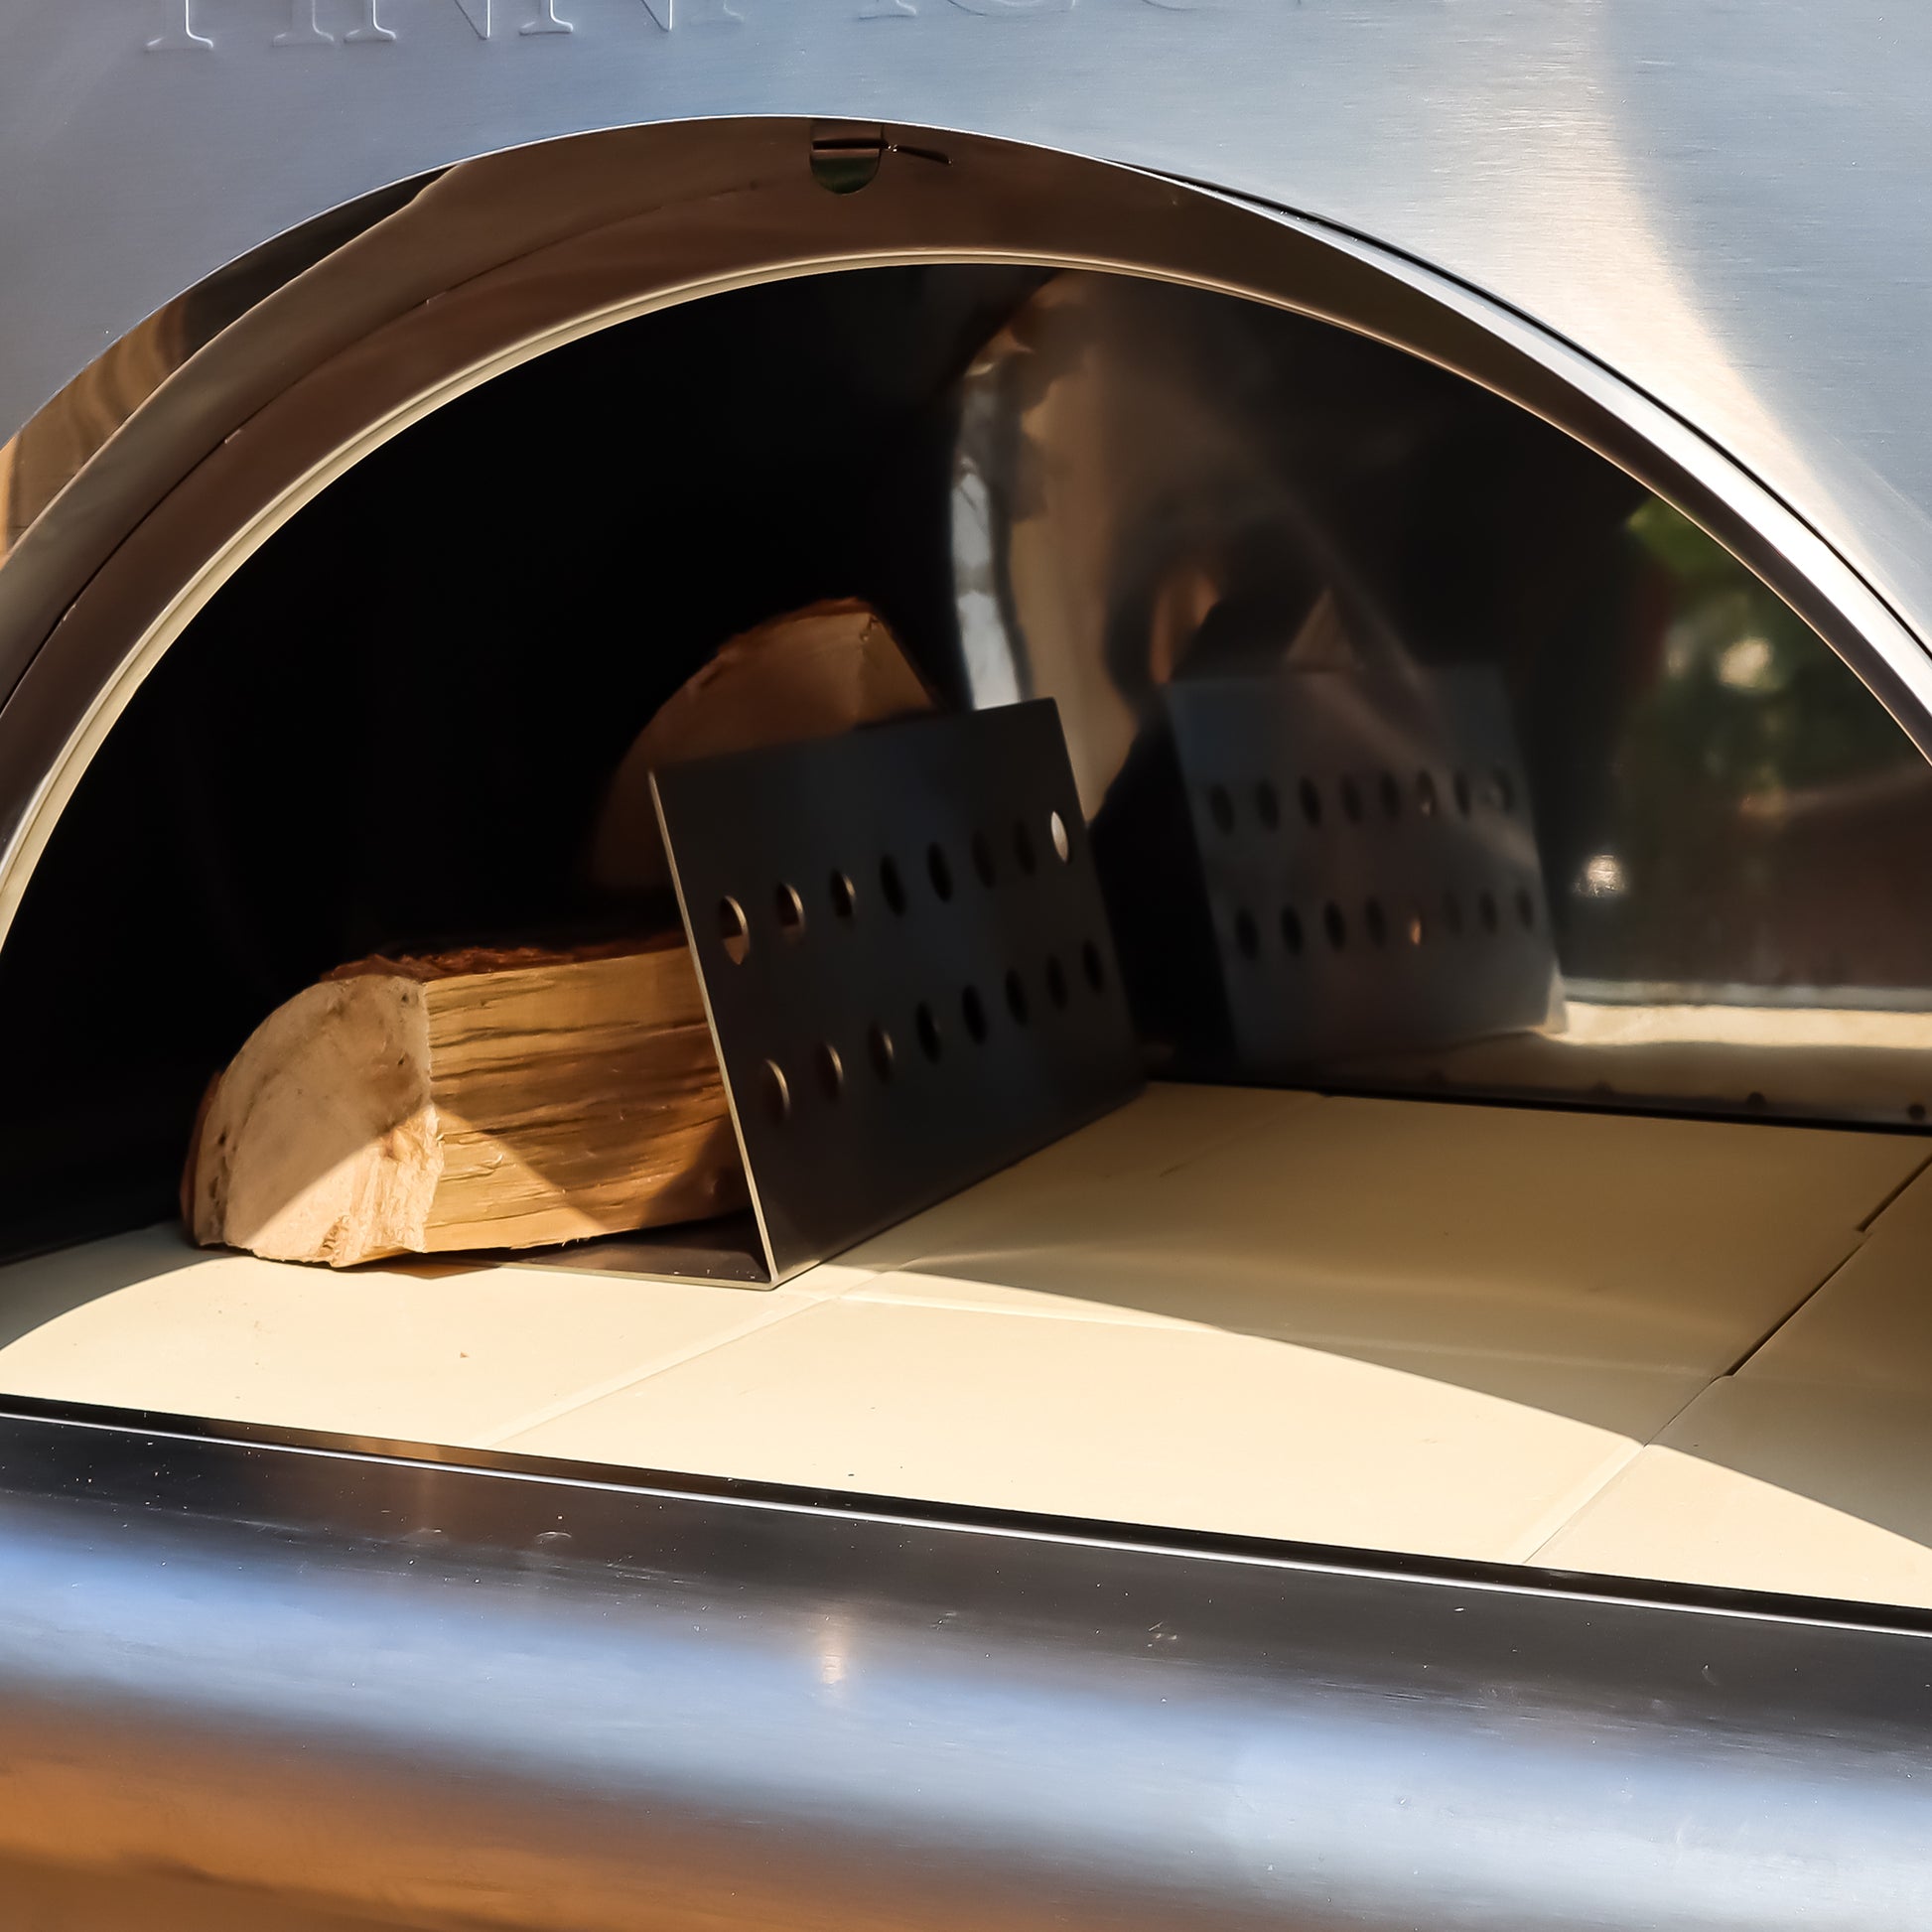 PINNACOLO | PREMIO Wood Fired Outdoor Pizza Oven with Accessories - PPO102 with wood in the oven 